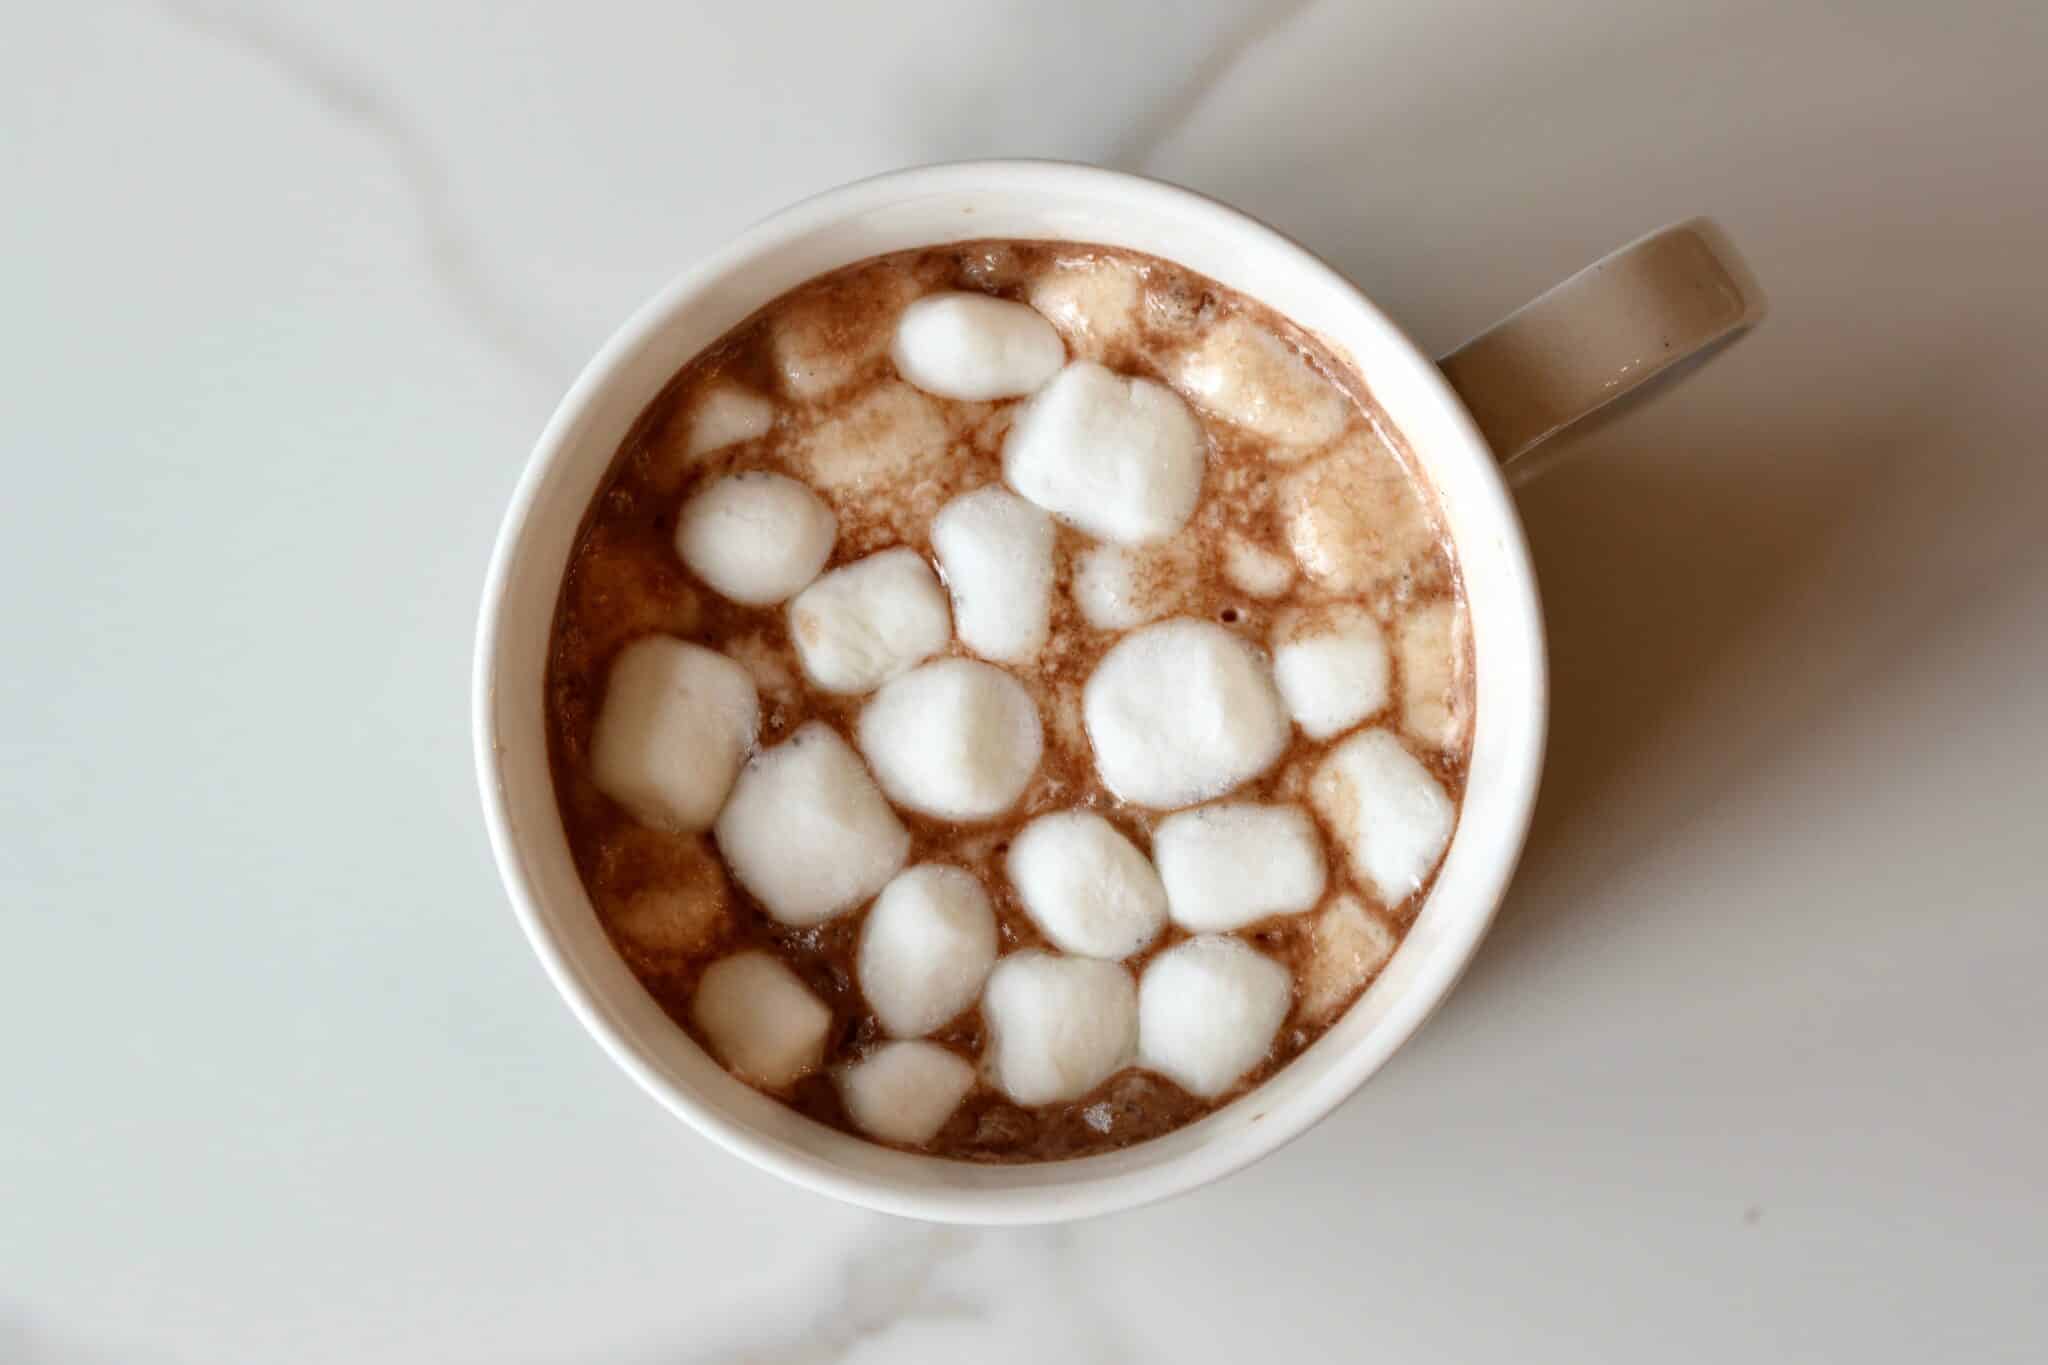 Hygge Hot Chocolate made with almond coconut milk. Curl up and keep warm with Hygge cocoa.